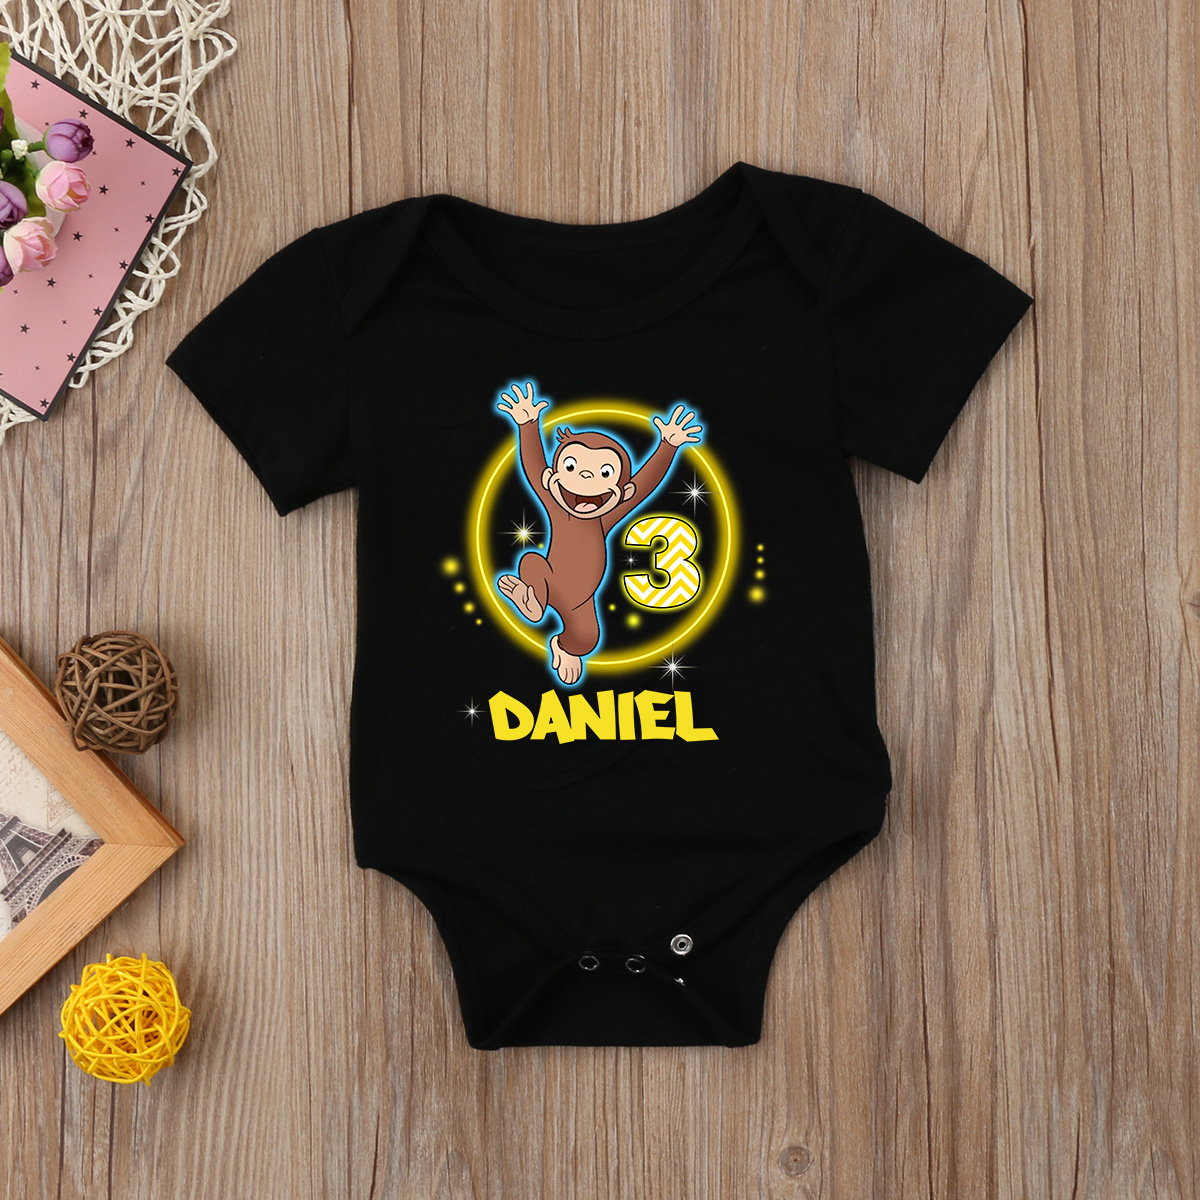 Personalized Curious George Birthday Shirt, Custom Matching Family Set Birthday Shirt, Personalized Birthday Gifts